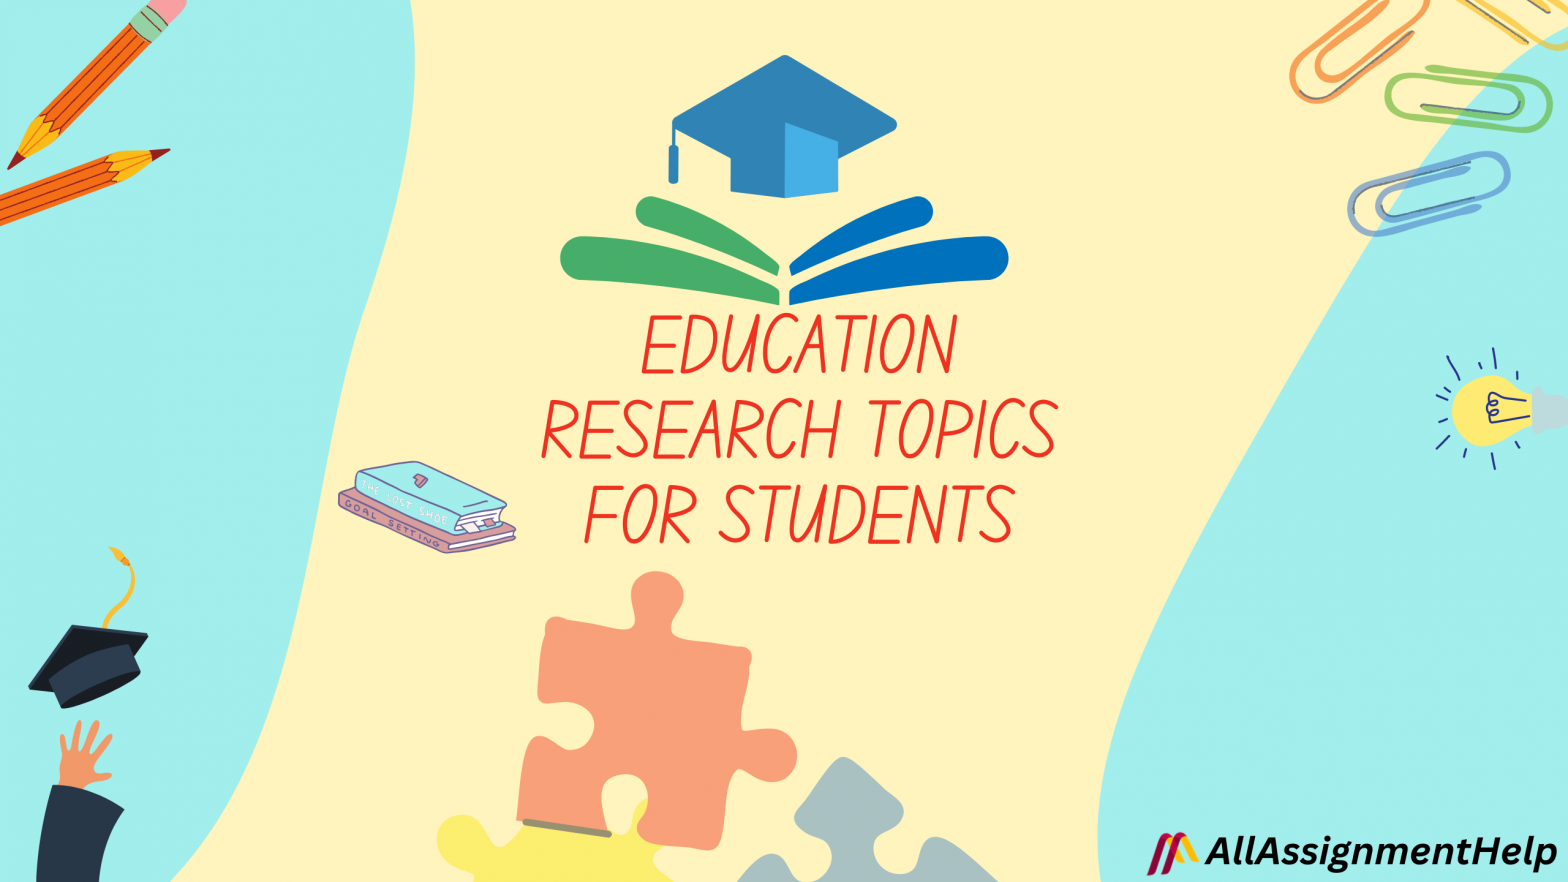 Education research topics